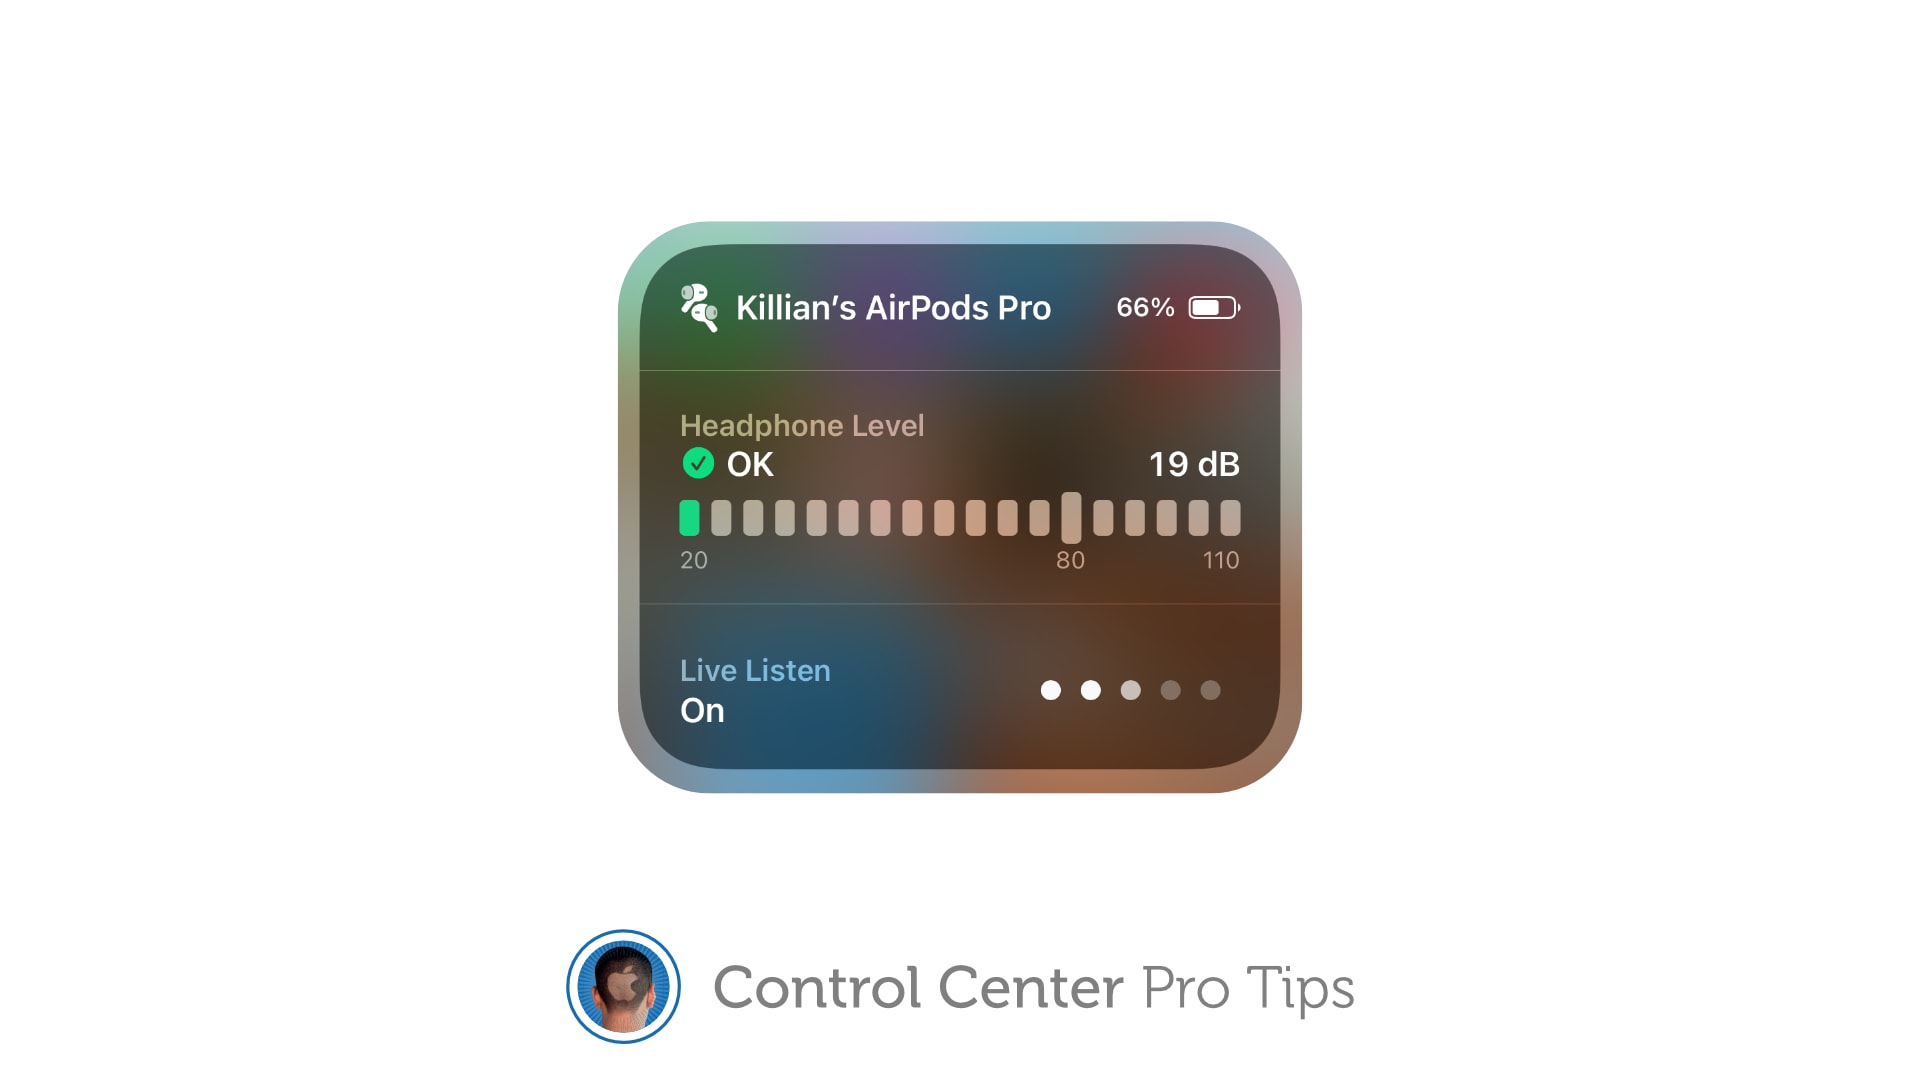 Activate Live Listen AirPods inside Control Center [Pro tip]